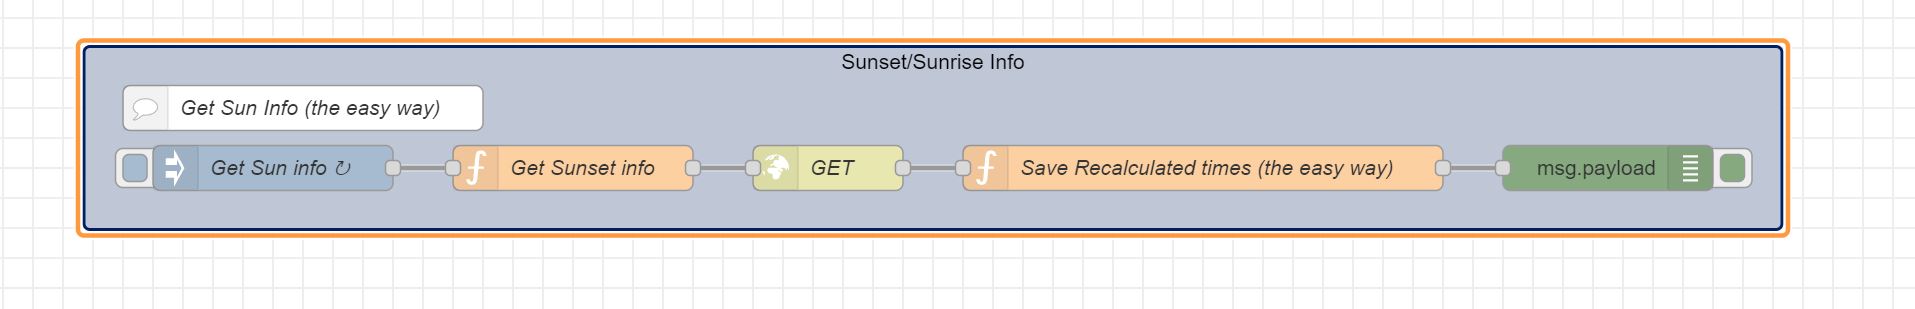 Using API to get sunset/sunrise info in NodeRED